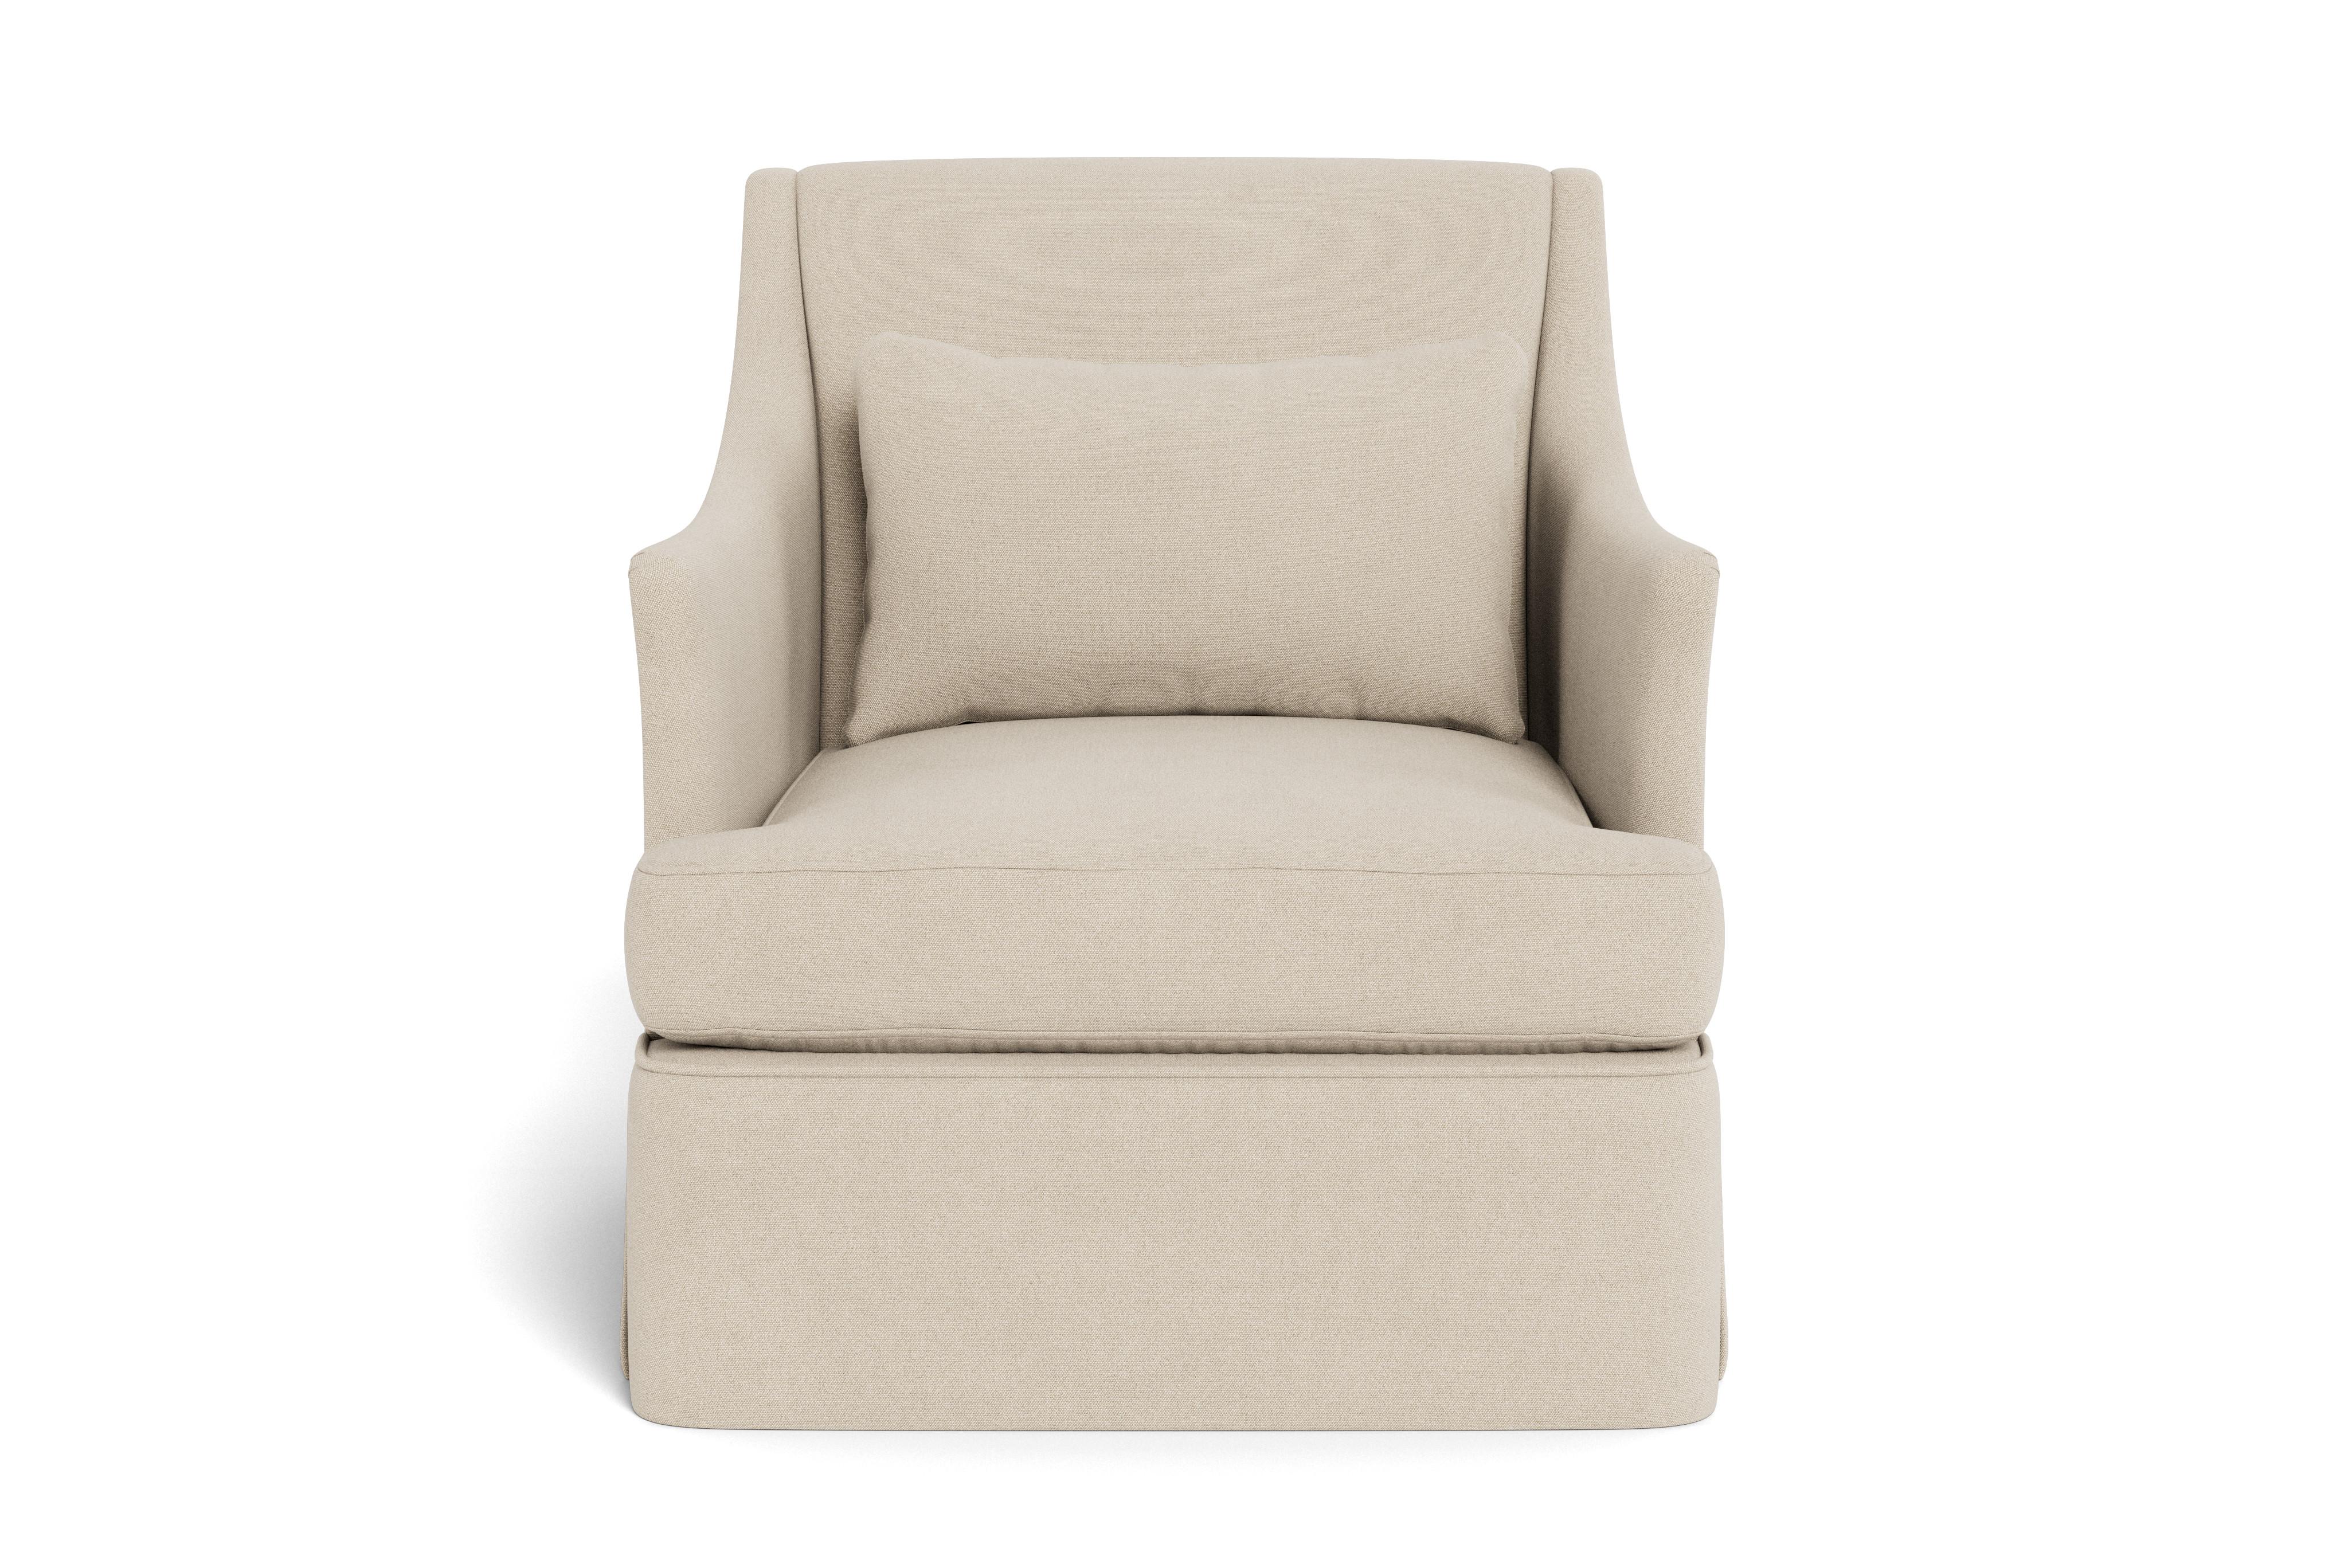 A streamlined armchair that melds the casual appearance of a slipcover with the reassuring elegance of tailored, fitted upholstery. Tight back and single seat cushion. Swivel option available.  Spring down cushions include: individually wrapped